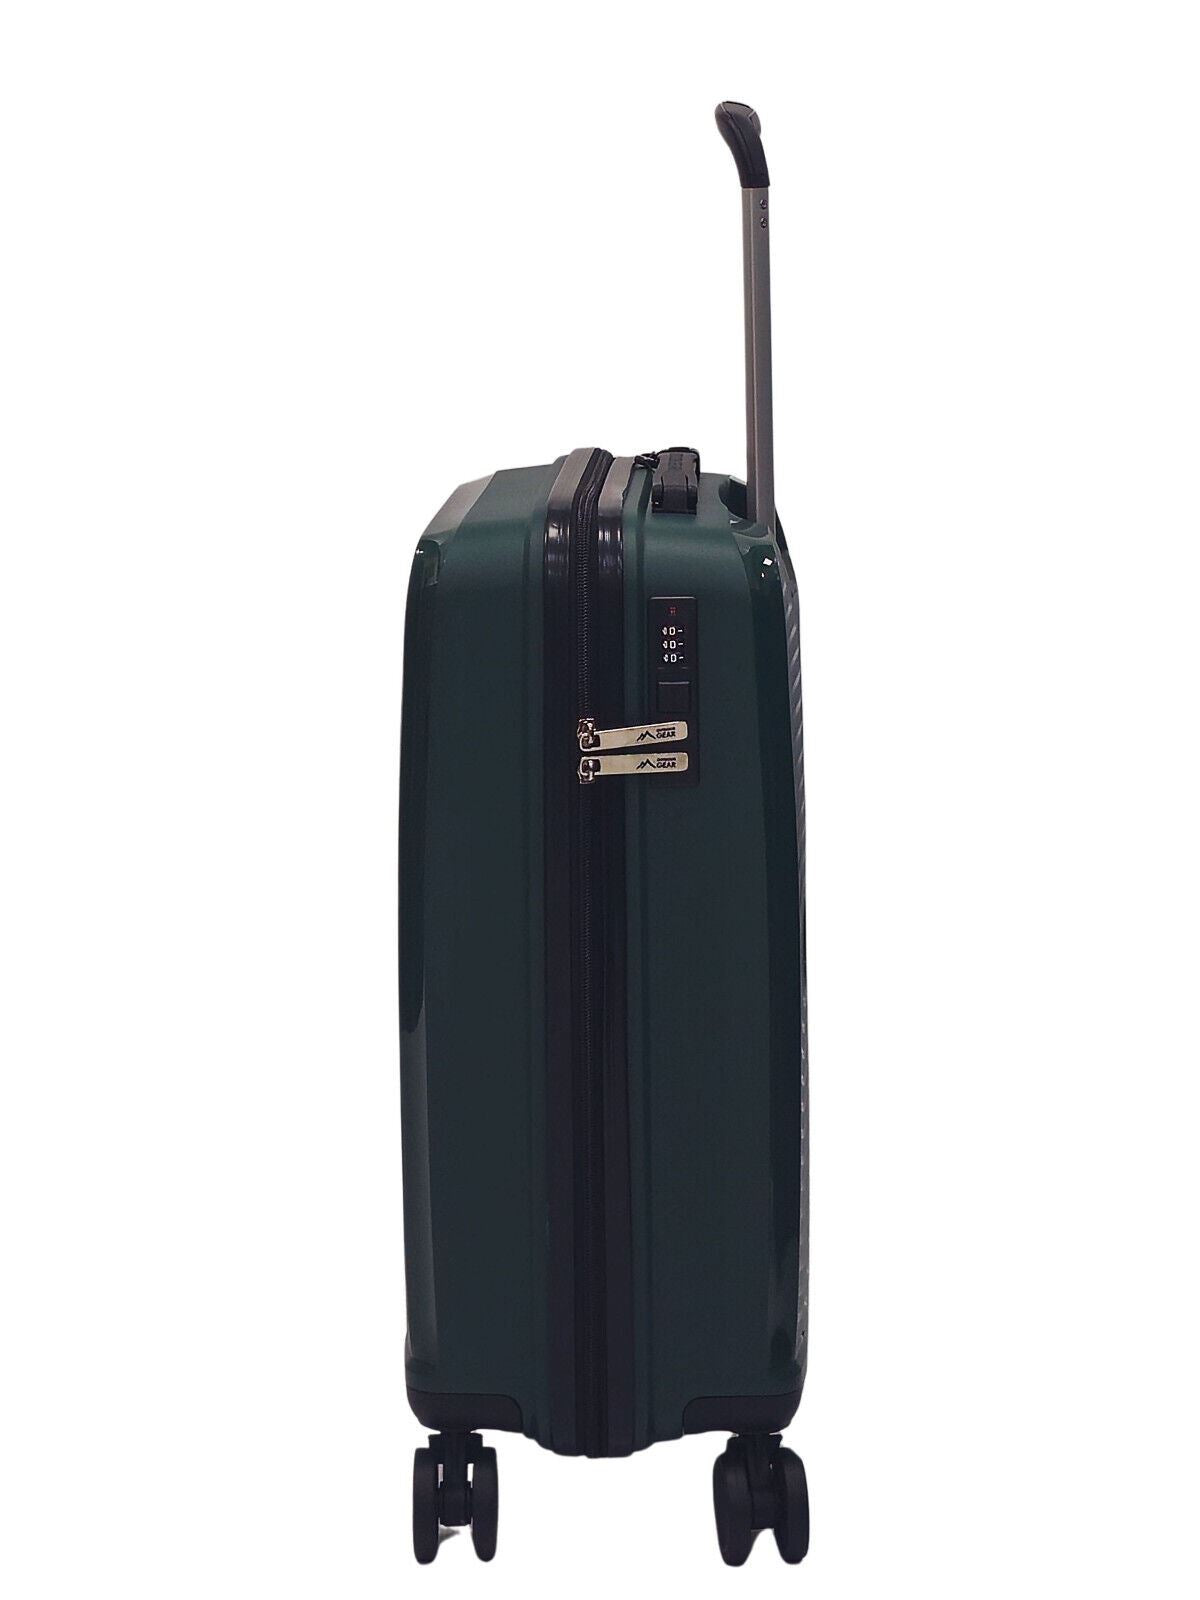 Abbeville Cabin Hard Shell Suitcase in Green